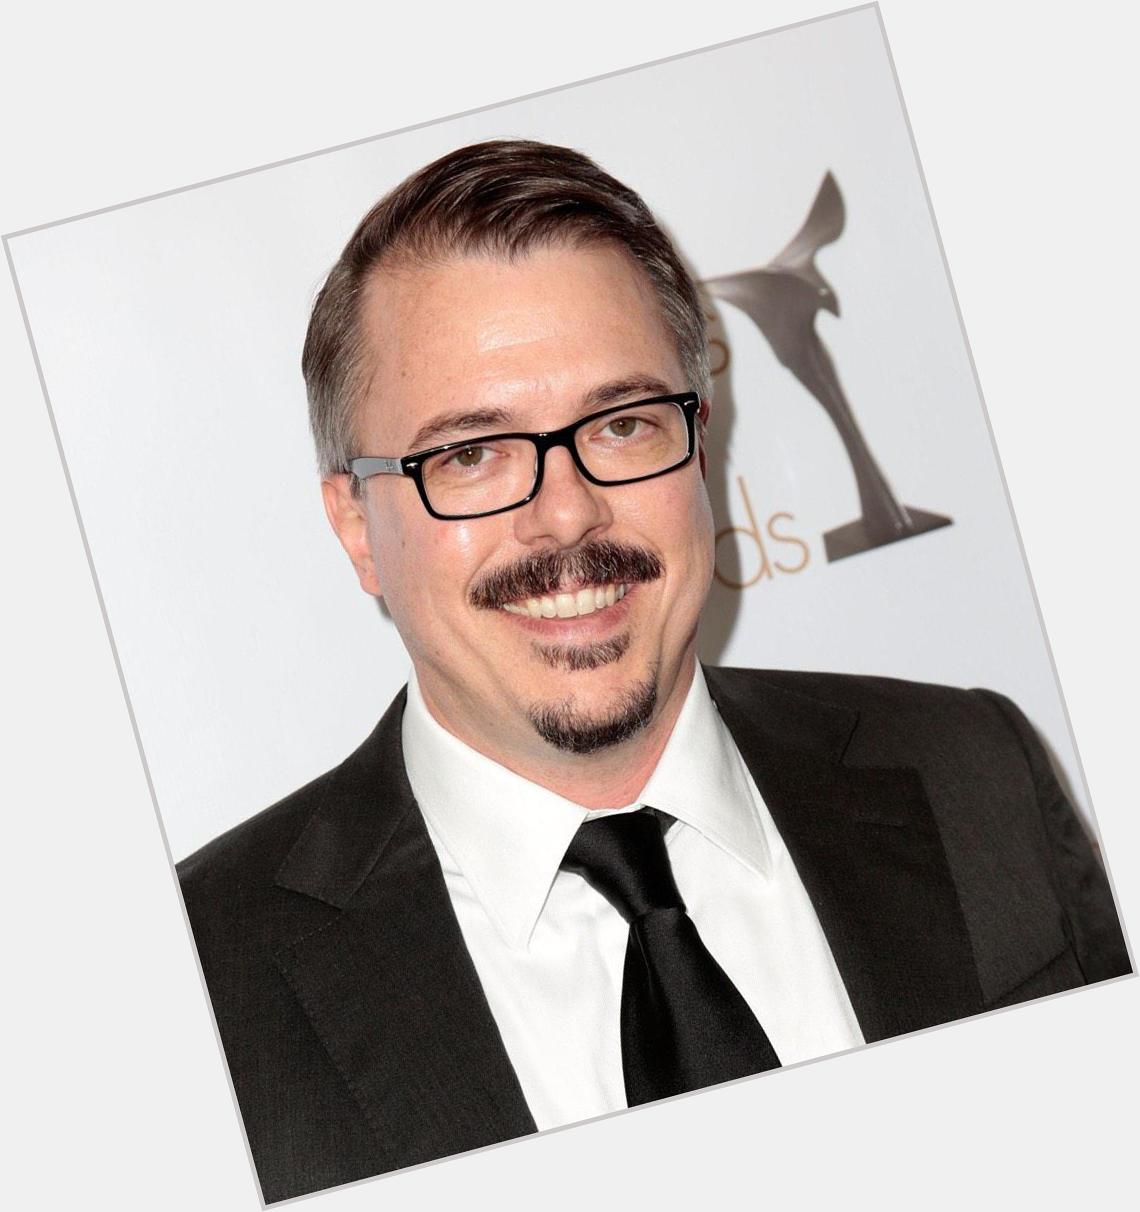 Happy Birthday to the mastermind behind one of my all-time favorite shows Breaking Bad, Mr. Vince Gilligan. 